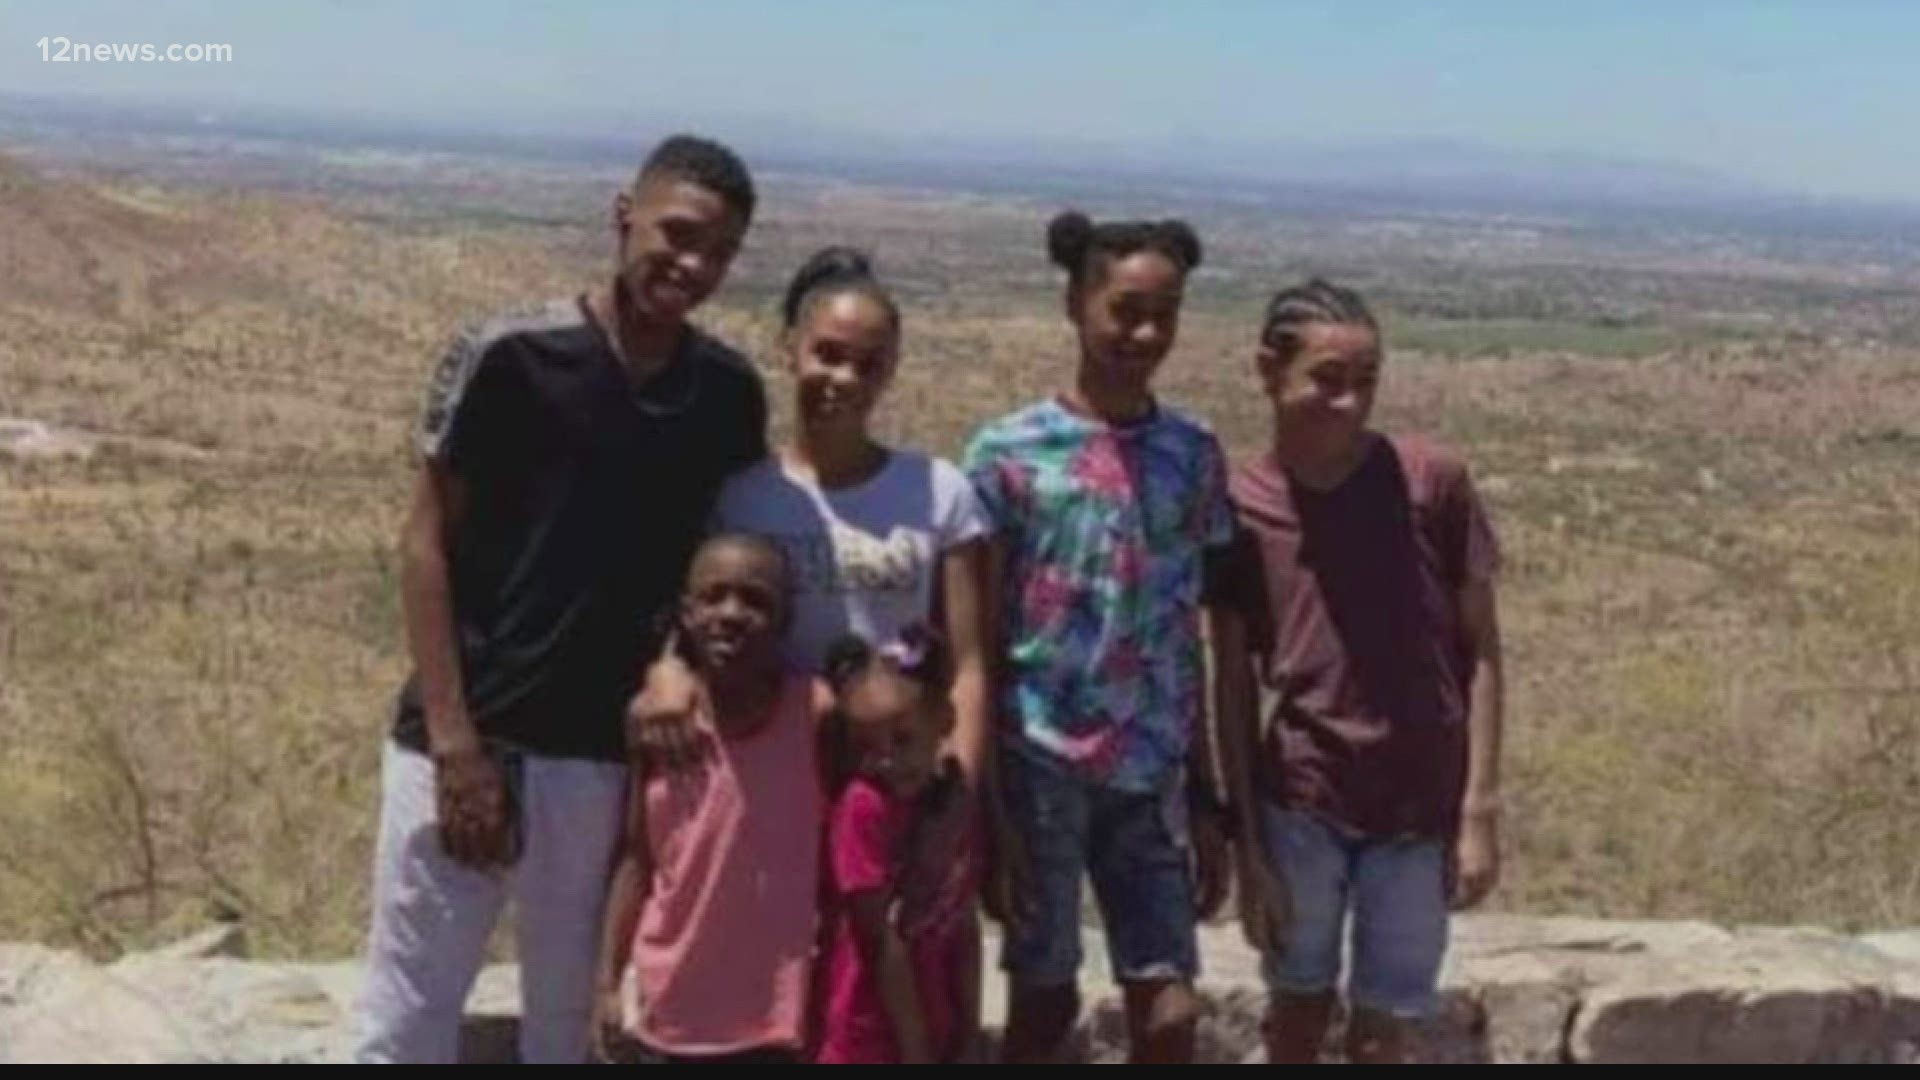 Natisha Moffett and her five kids were killed in a horrific crash in Tonopah on their way out of the state for the holiday weekend.